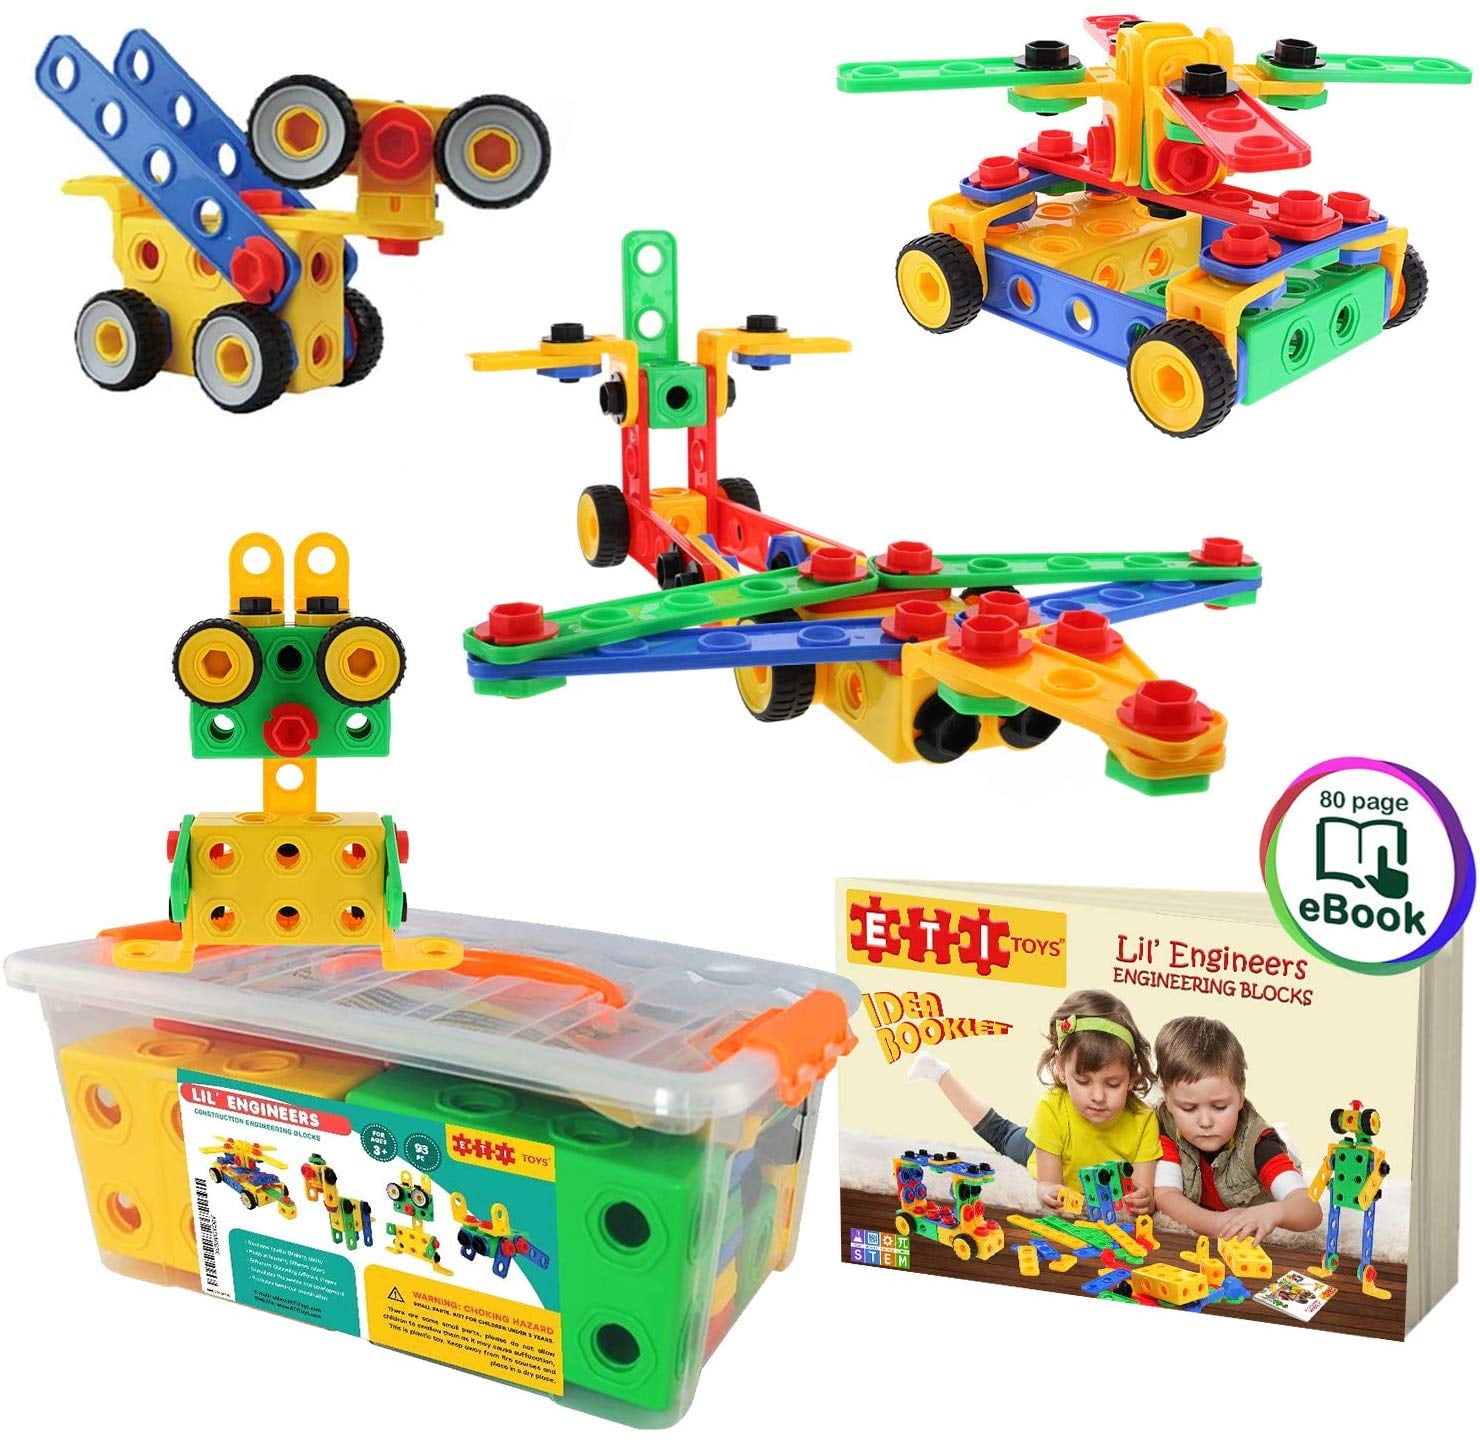 age appropriate toys for 4 year old